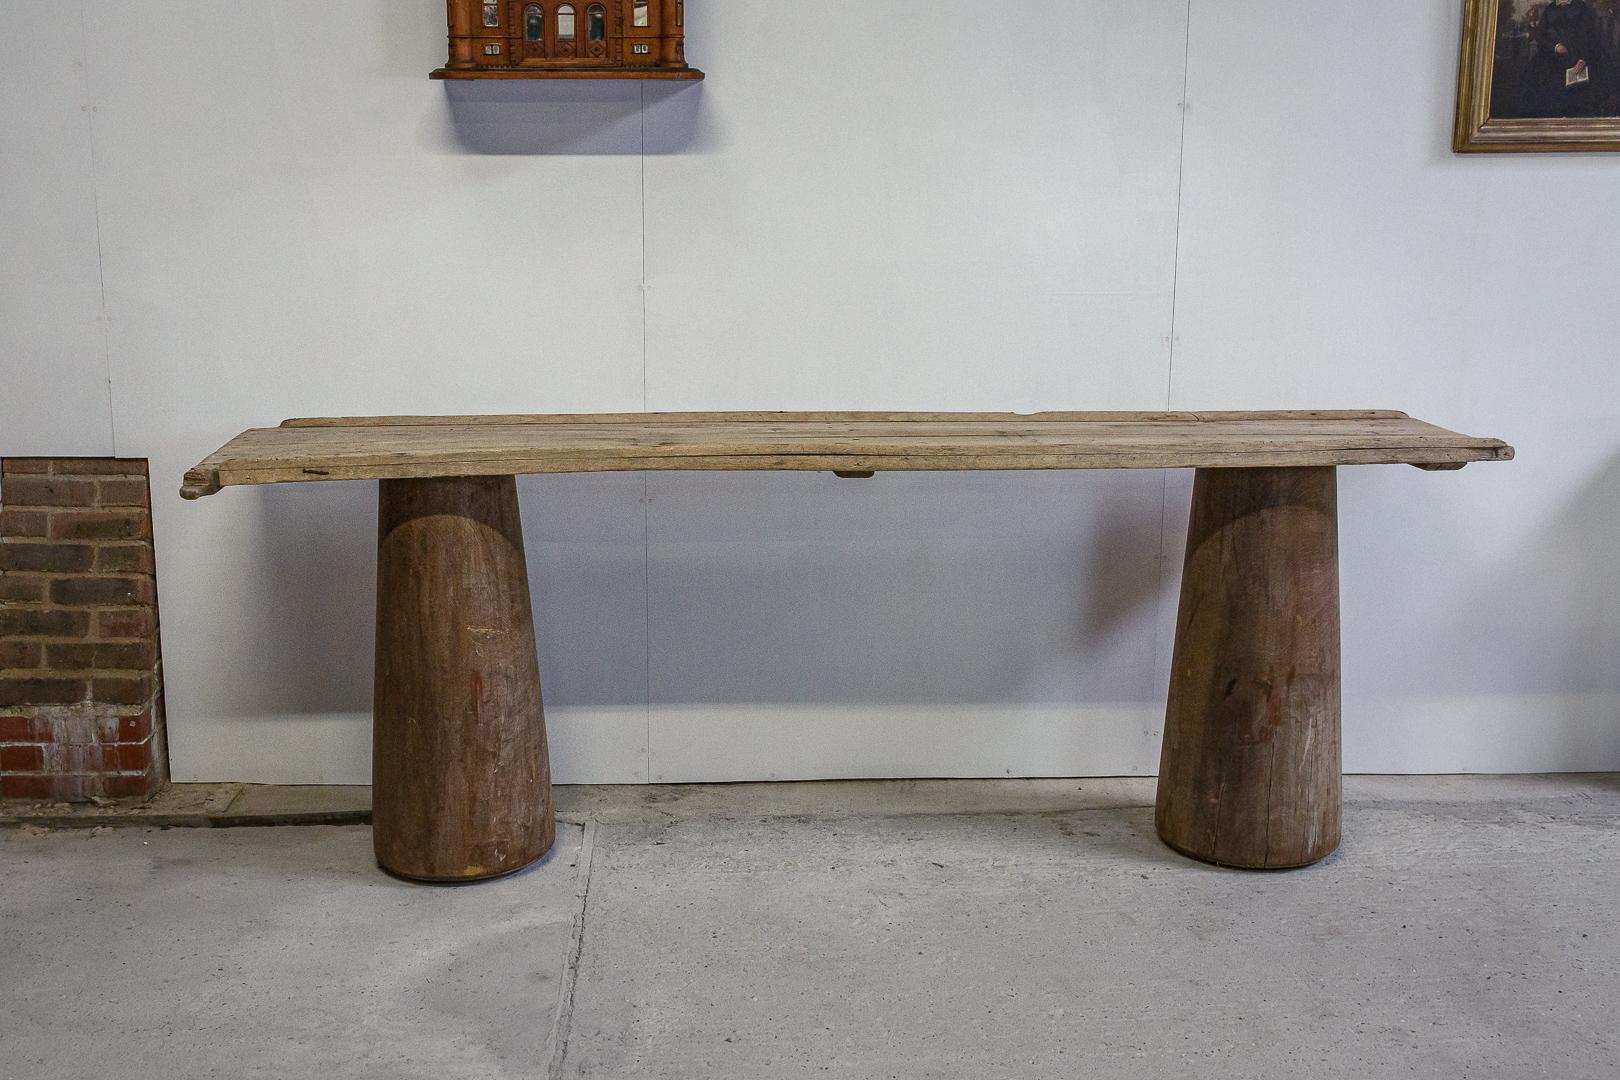 Large scale timber trunk or pillar console table, hardwood timber tapering pillars, the top is a reclaimed grain slide used for sliding sacks of grain from the first level is a storage barn, this has given it a wonderful dry, pale, worn sun bleached